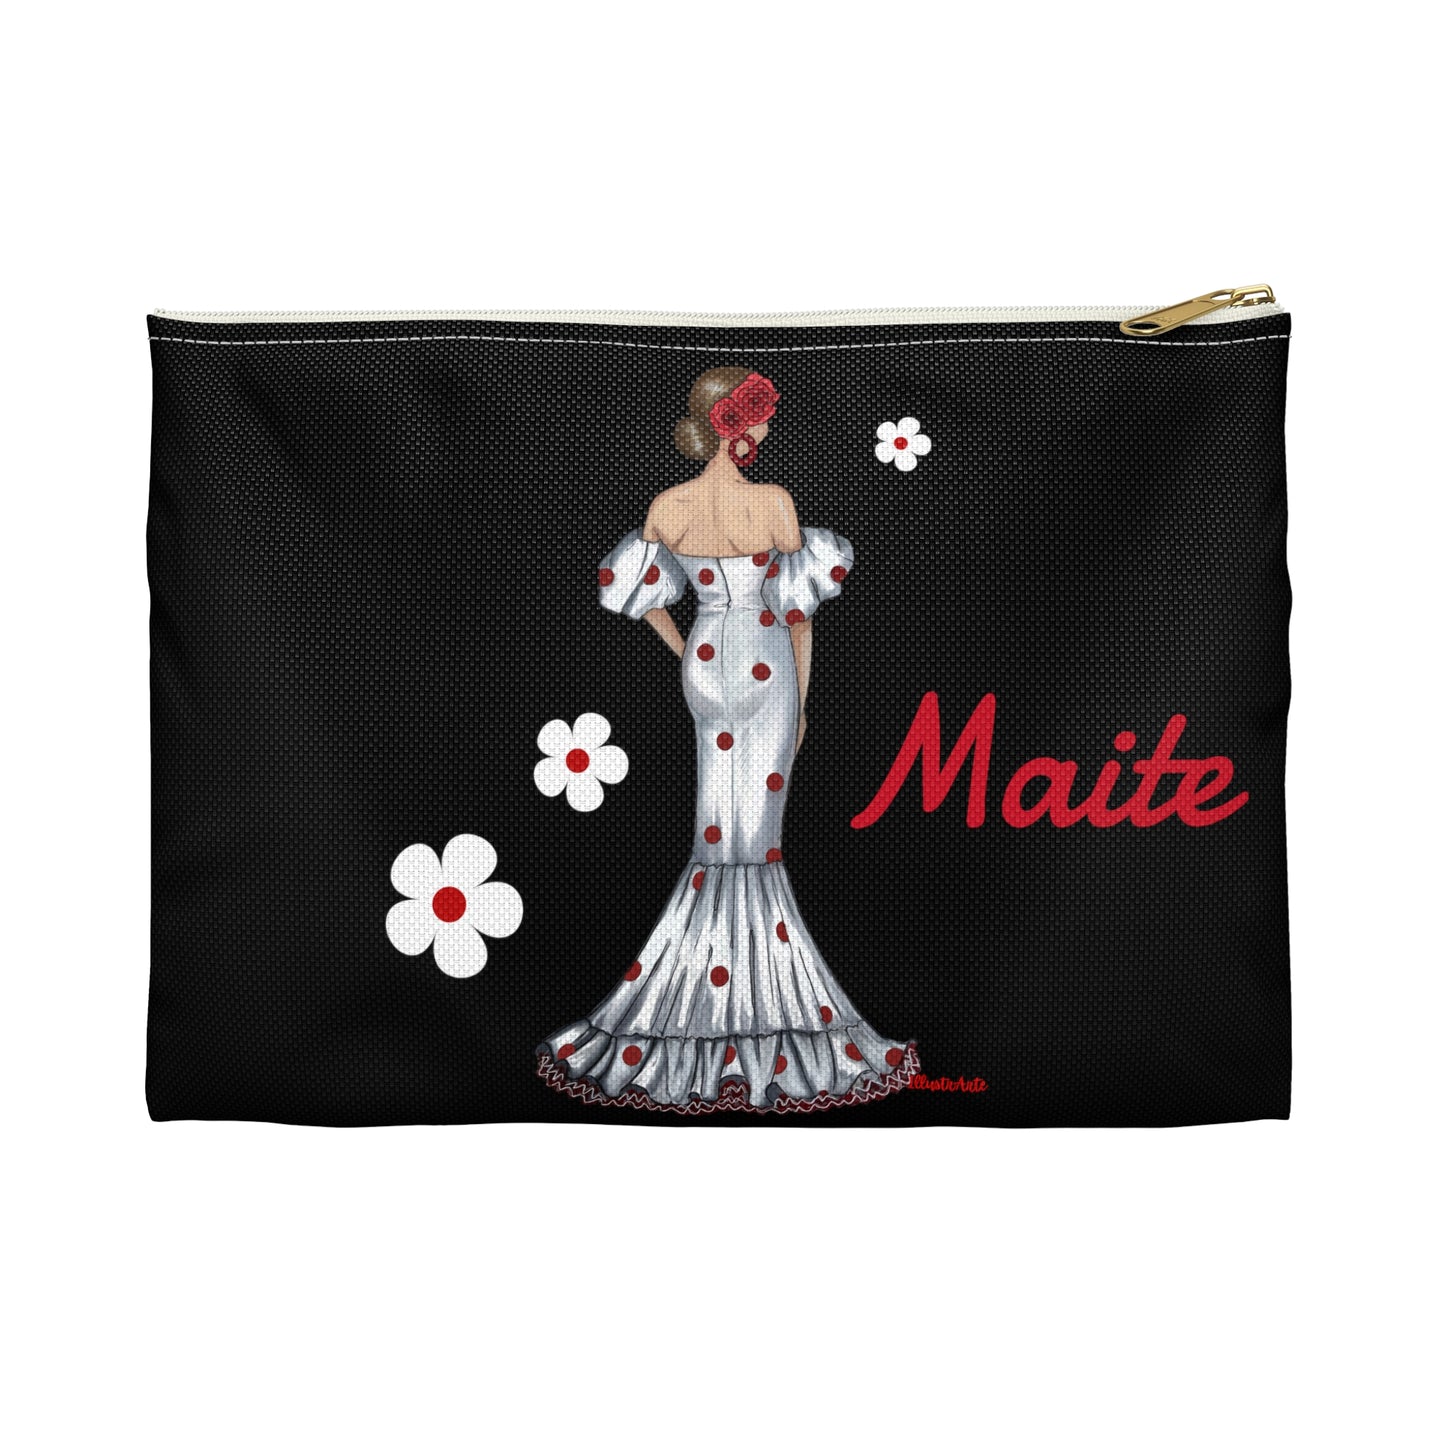 a black bag with a woman in a dress on it